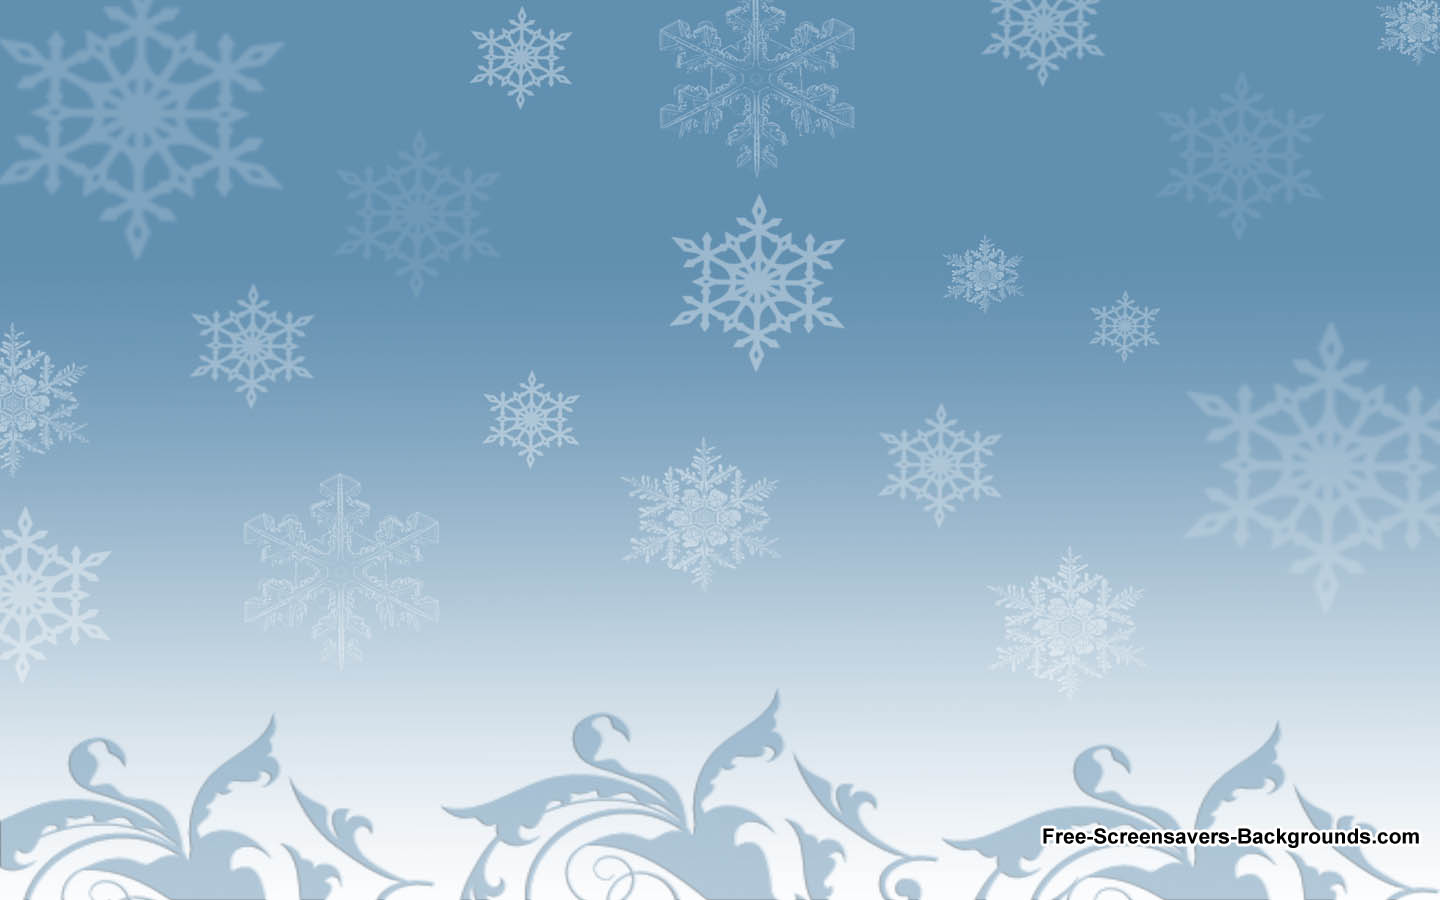 Winter Snow Free Screensavers and Backgrounds